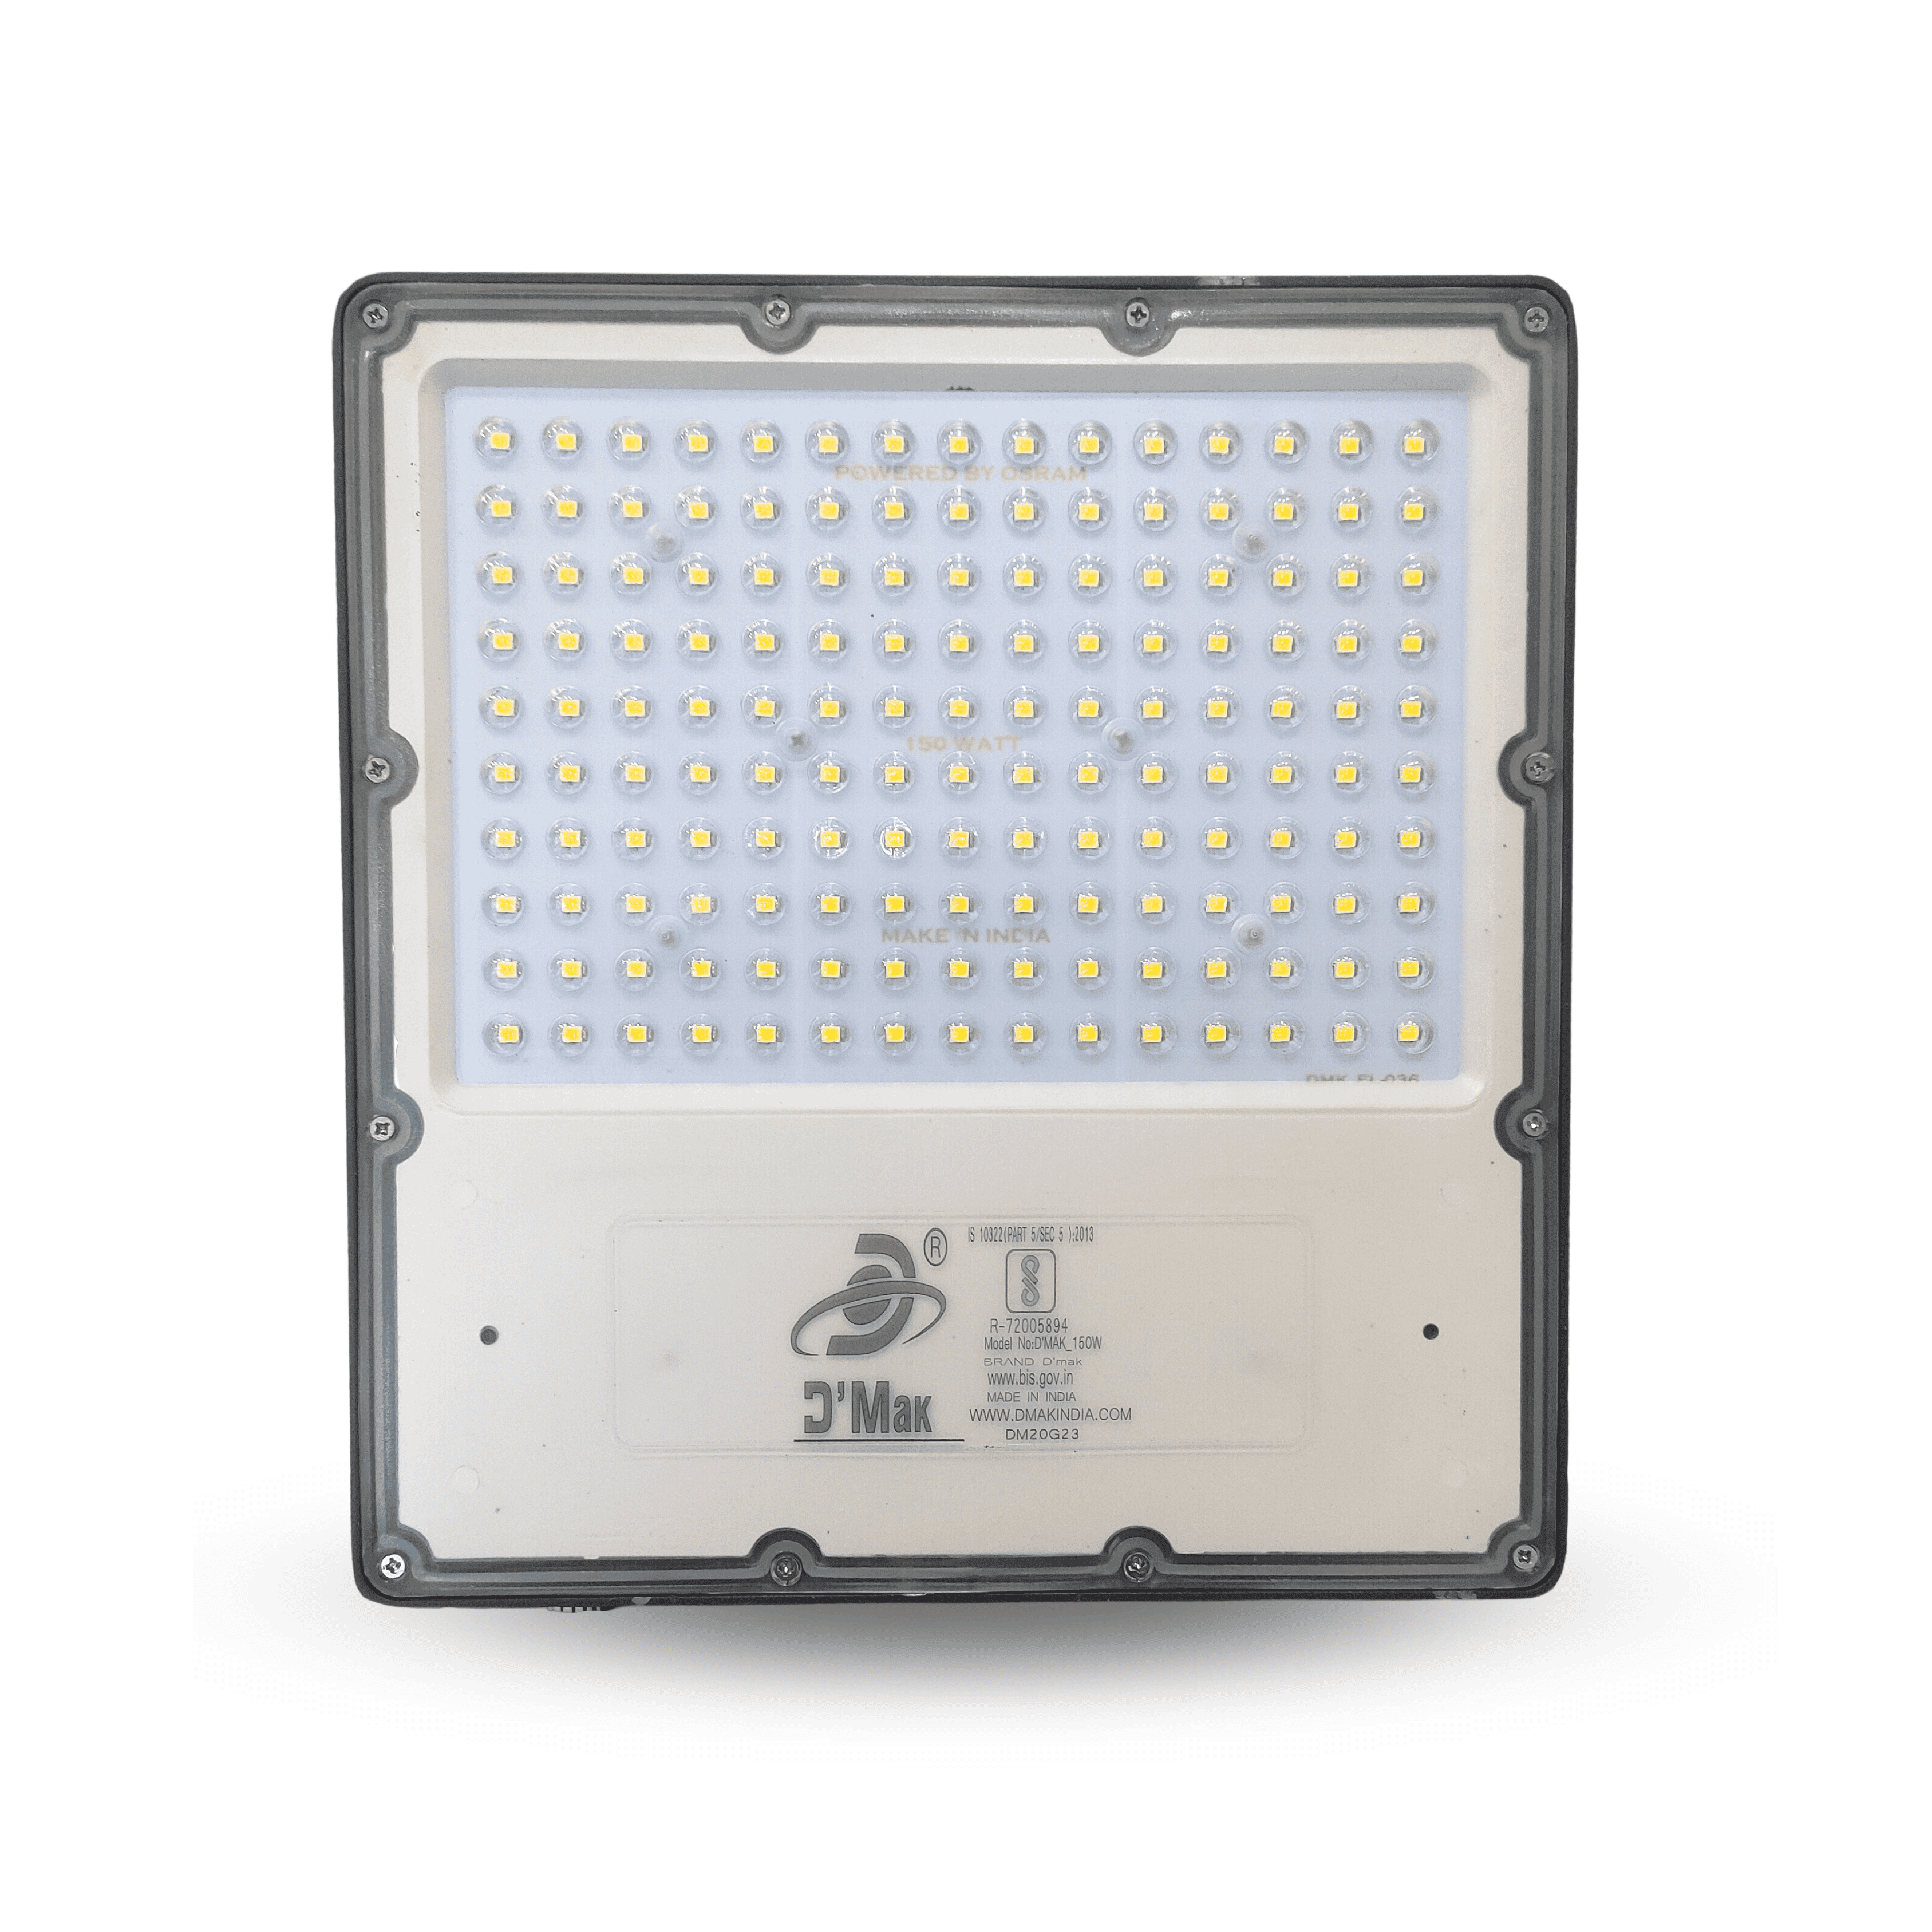 150 Watt LED Flood Light With Lens White Body Waterproof IP65 for Outdoor Purposes